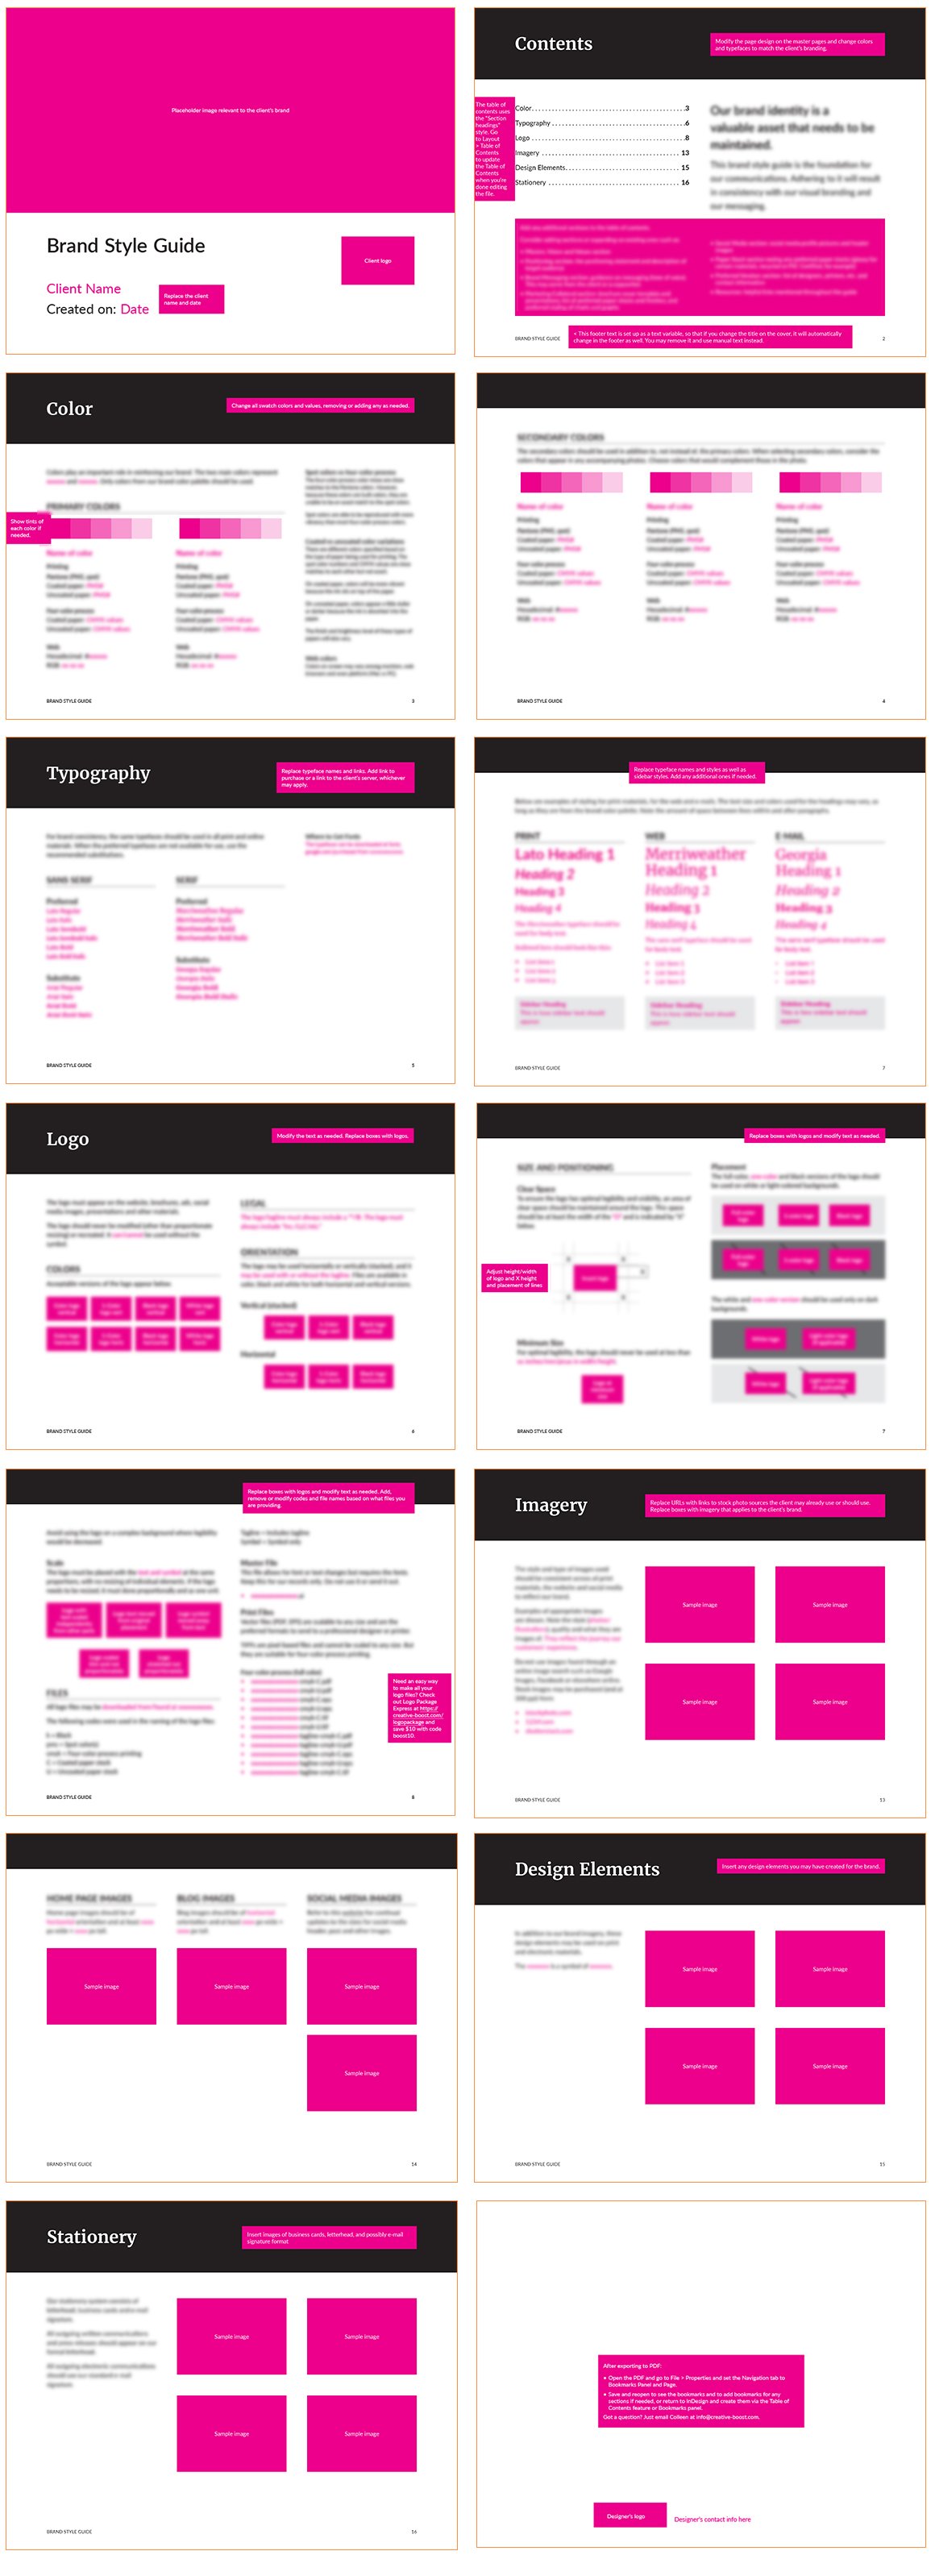 Brand Style Guide Template - Ultimate Version